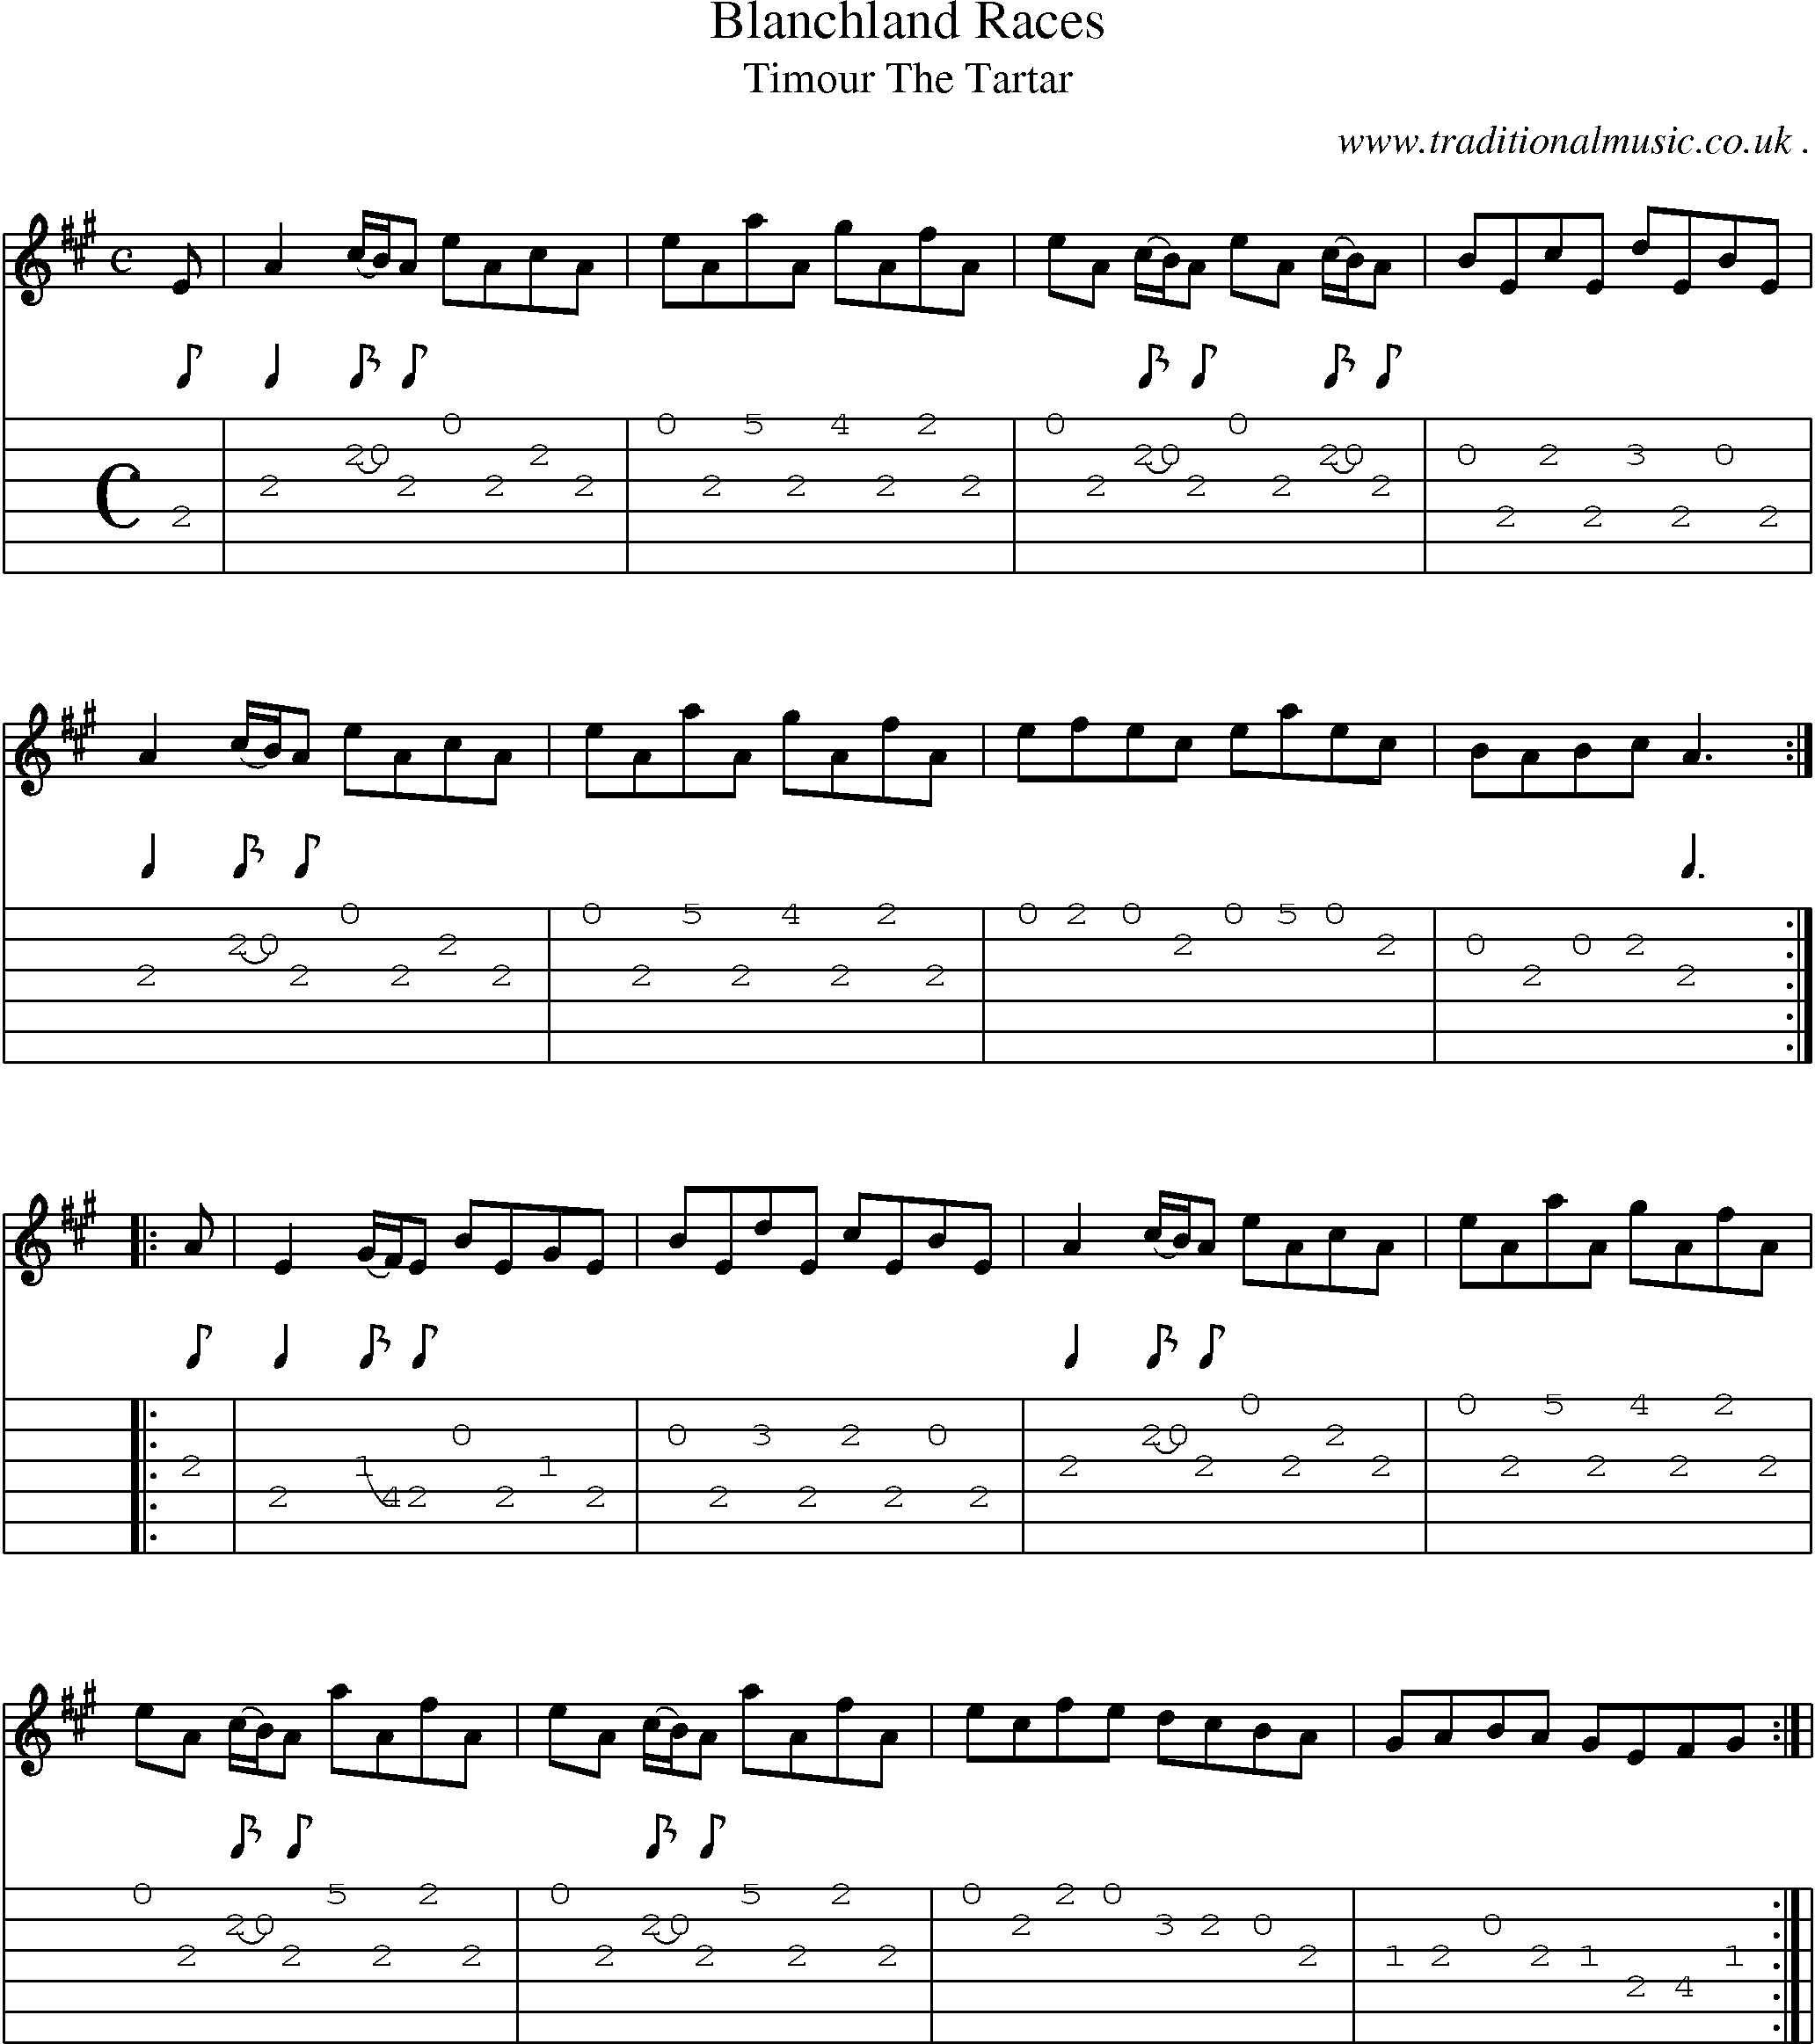 Sheet-Music and Guitar Tabs for Blanchland Races